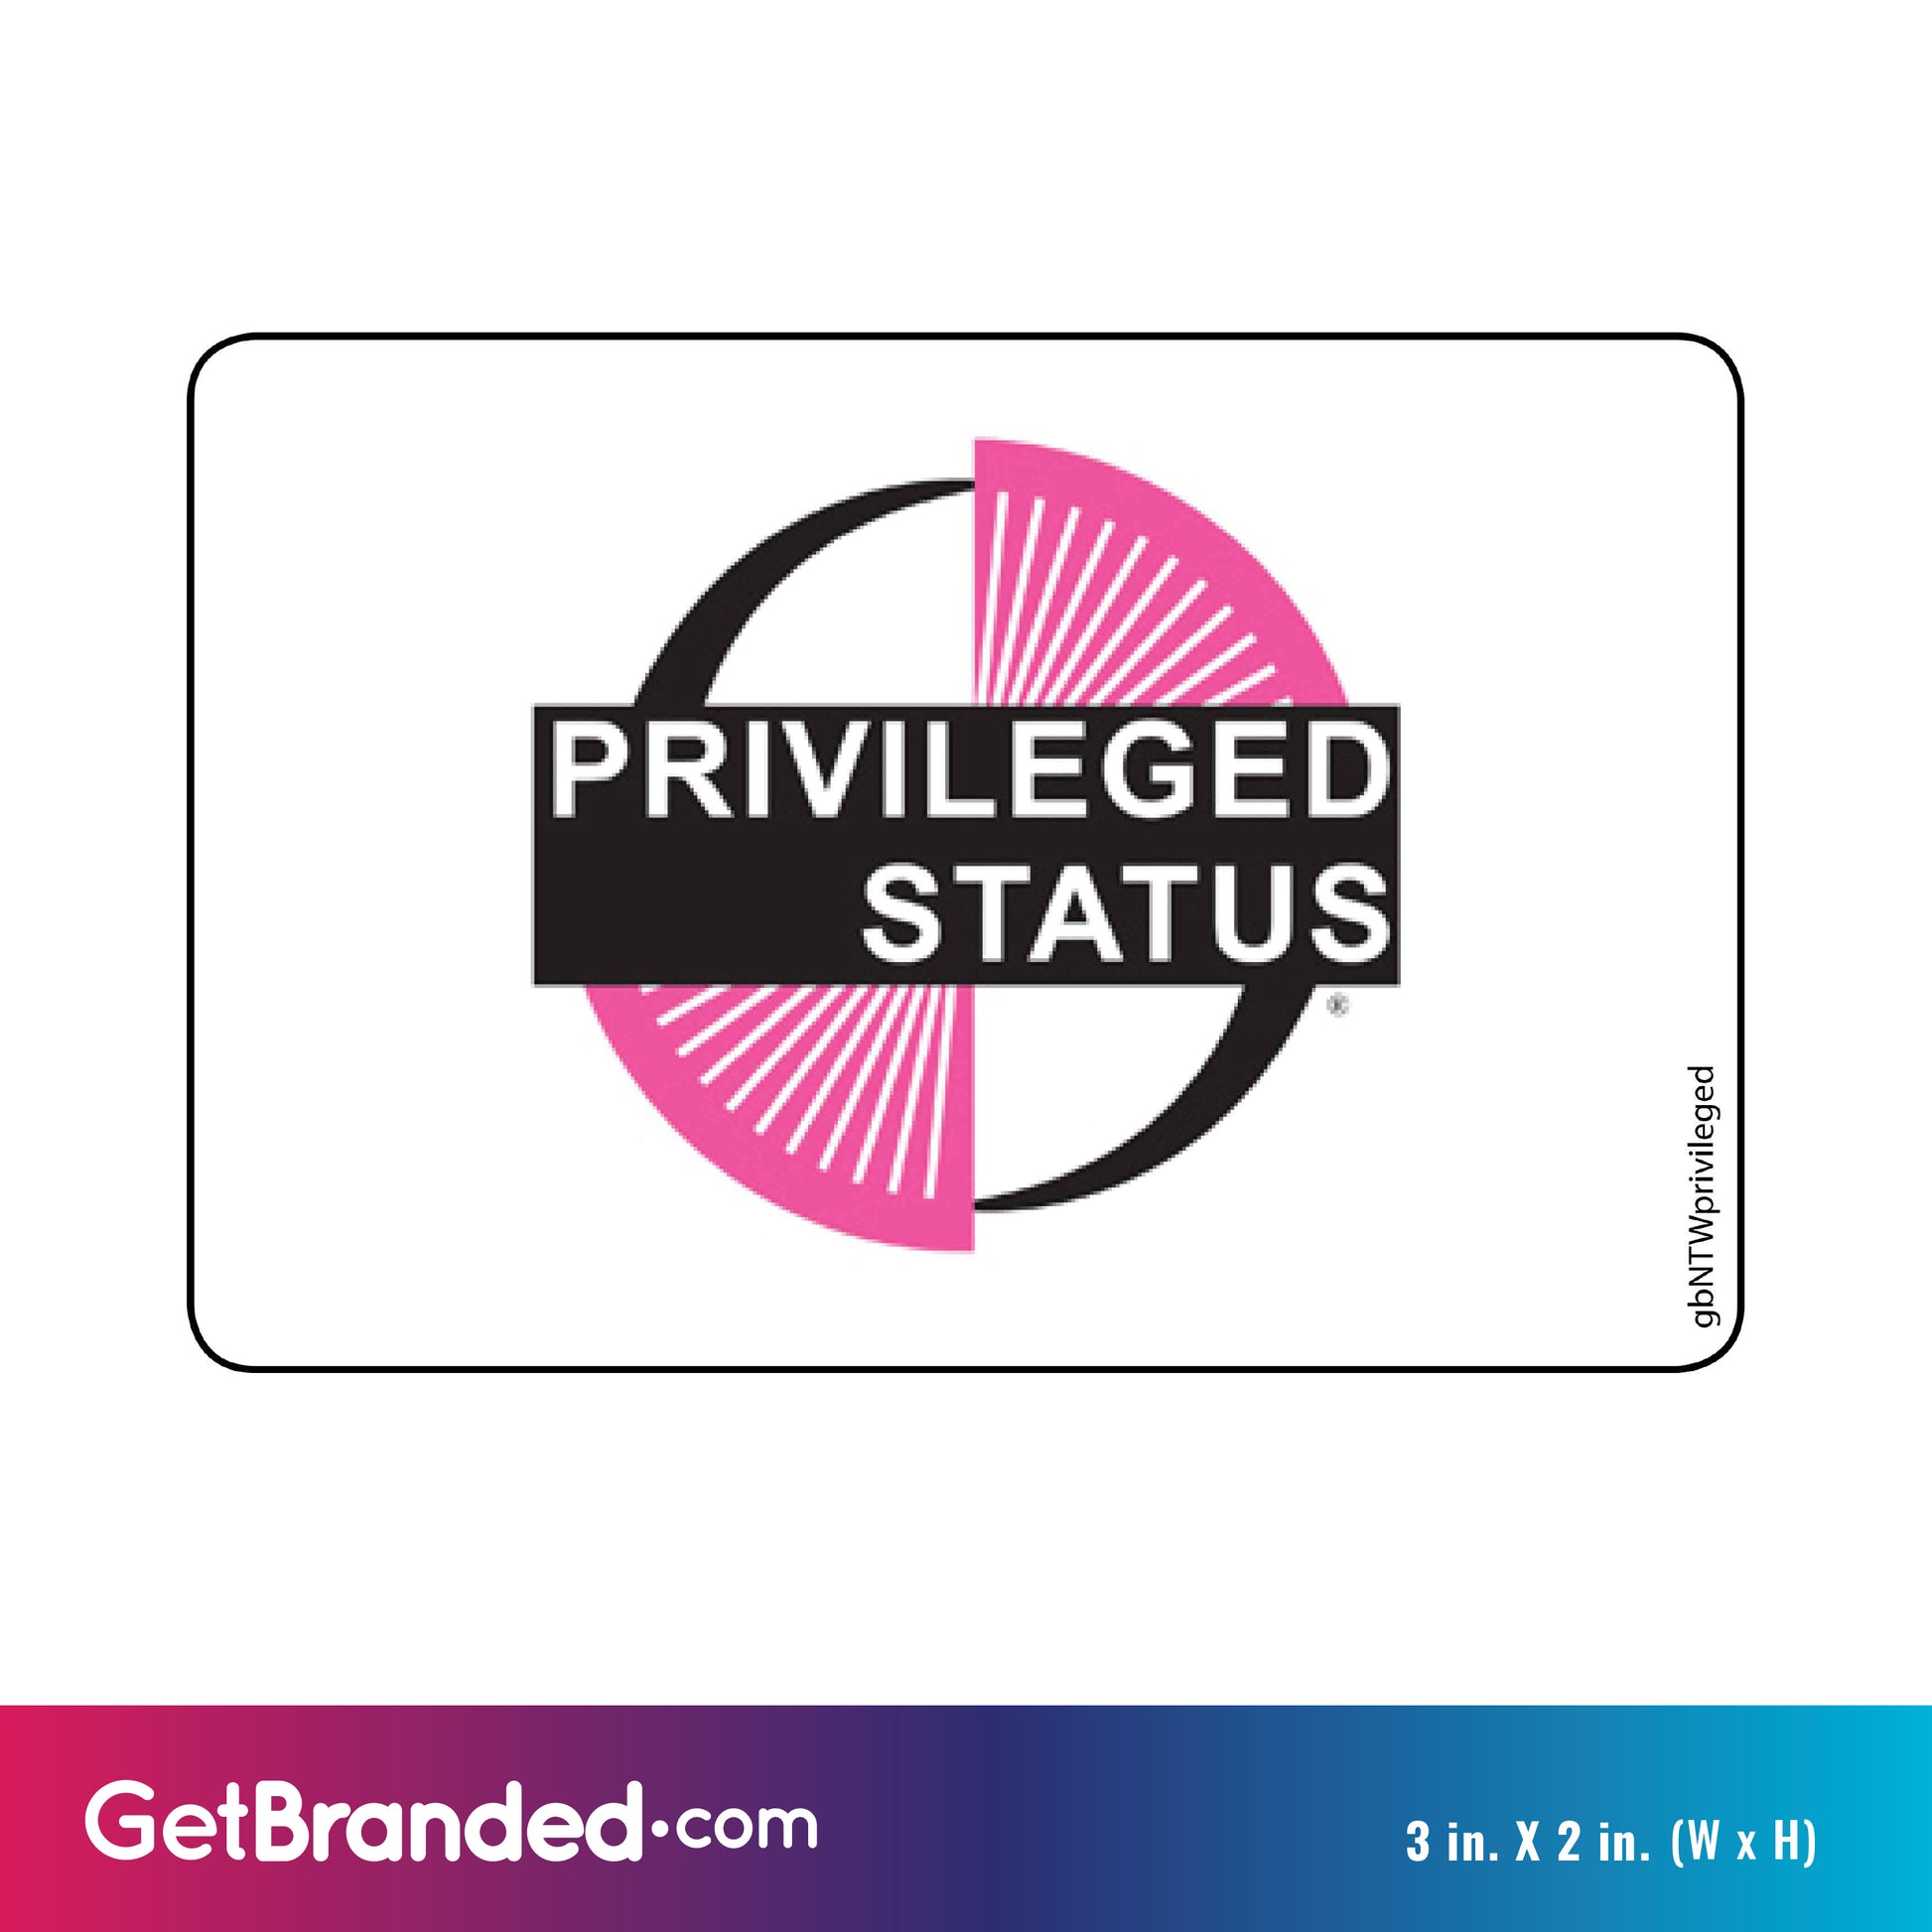 Single Network Decal, Privileged Status size guide.